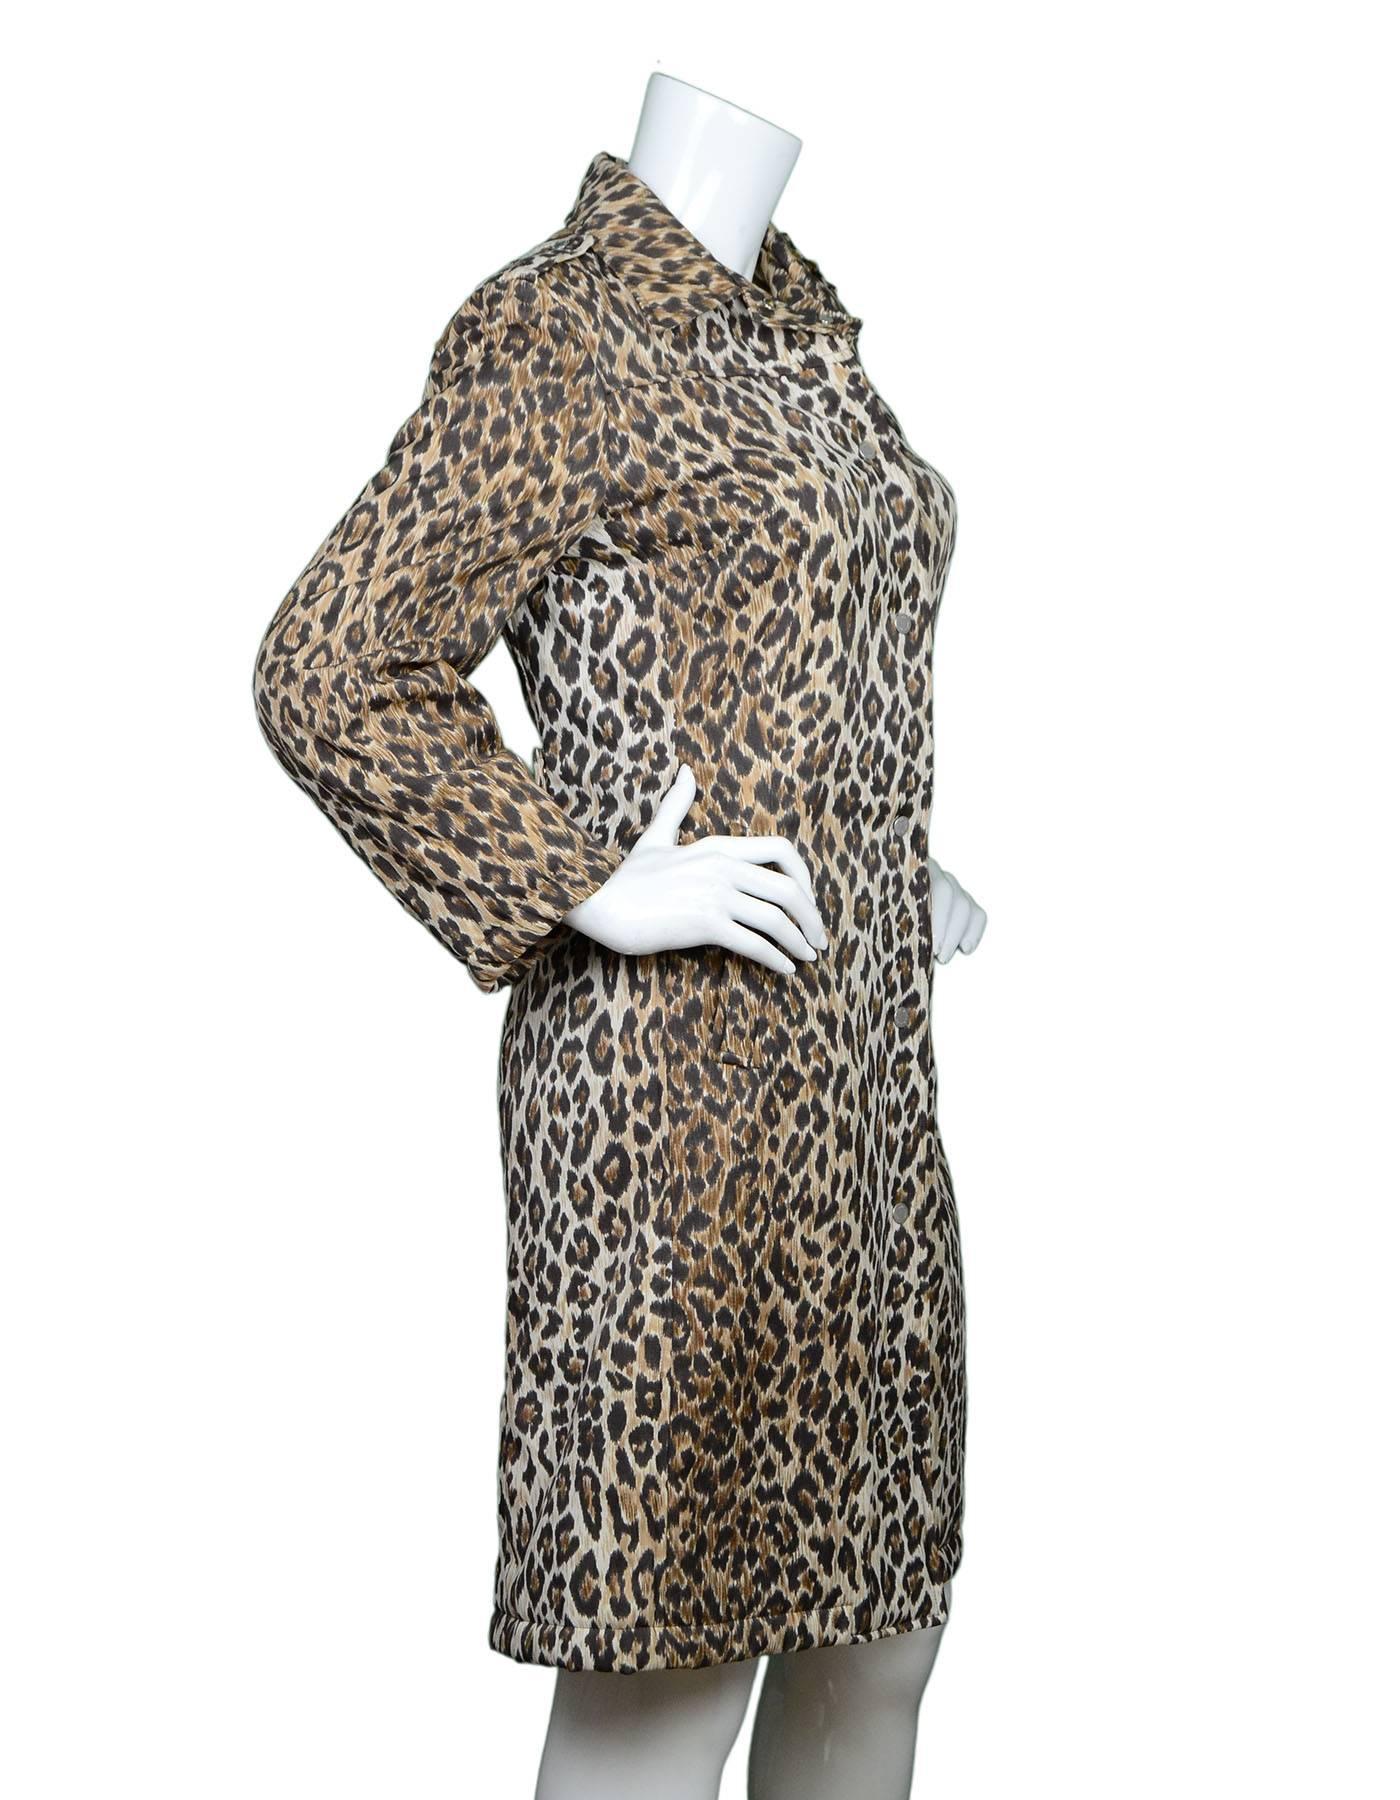 Dolce & Gabbana Leopard Print Peacoat
Features detachable strap at back waist

Made In: Italy
Color: Brown and tan leopard print
Composition: 62% polyester, 38% cotton
Lining: Yellow 100% polyester
Closure/Opening: Front snap down